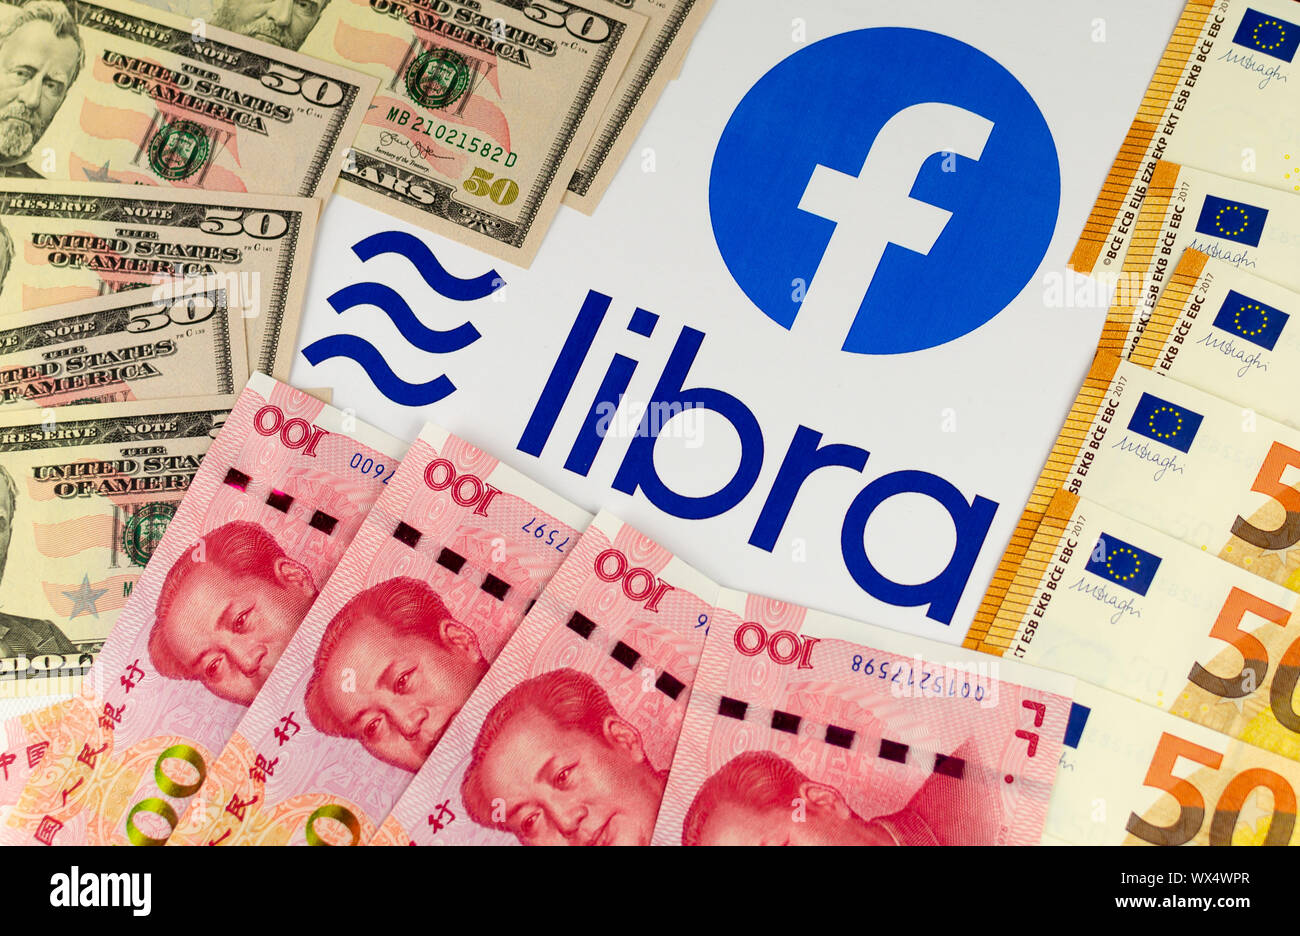 Facebook and its currency Libra logos on the brochure surrounded by US Dollars, Euros and Chinese yuan bills. Stock Photo